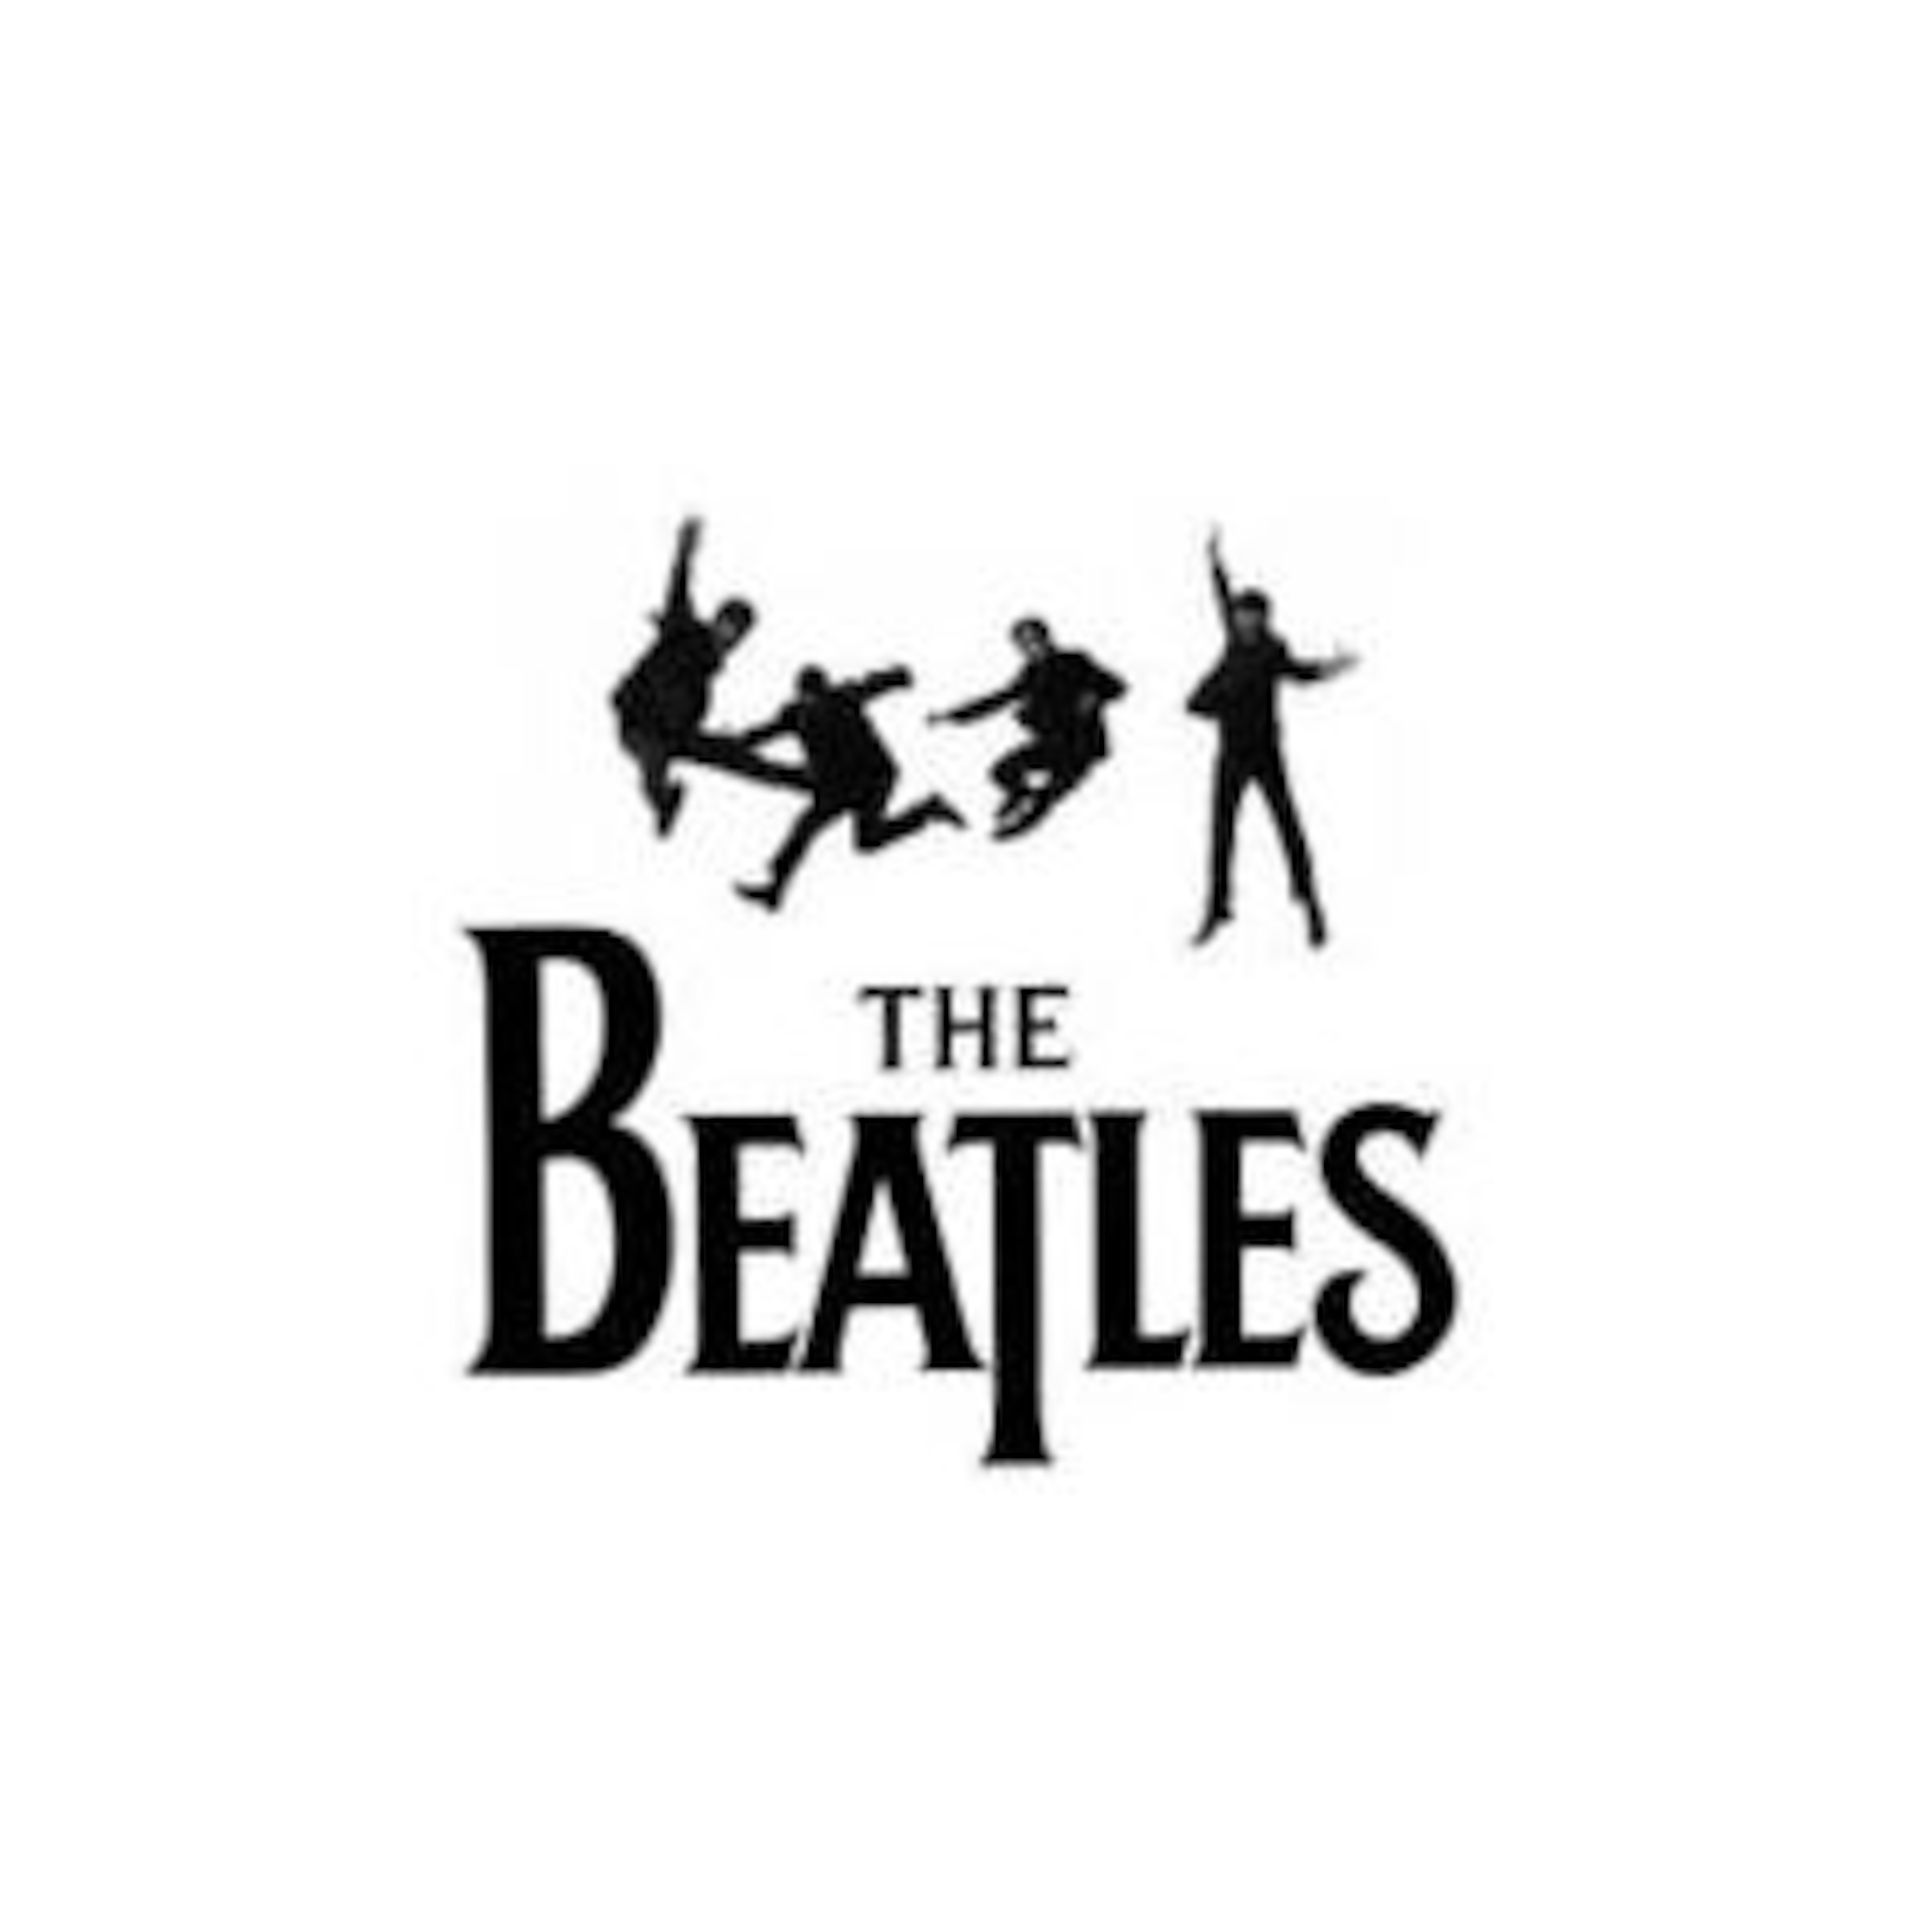 The Beatles Now and Then Listen Free on Castbox.